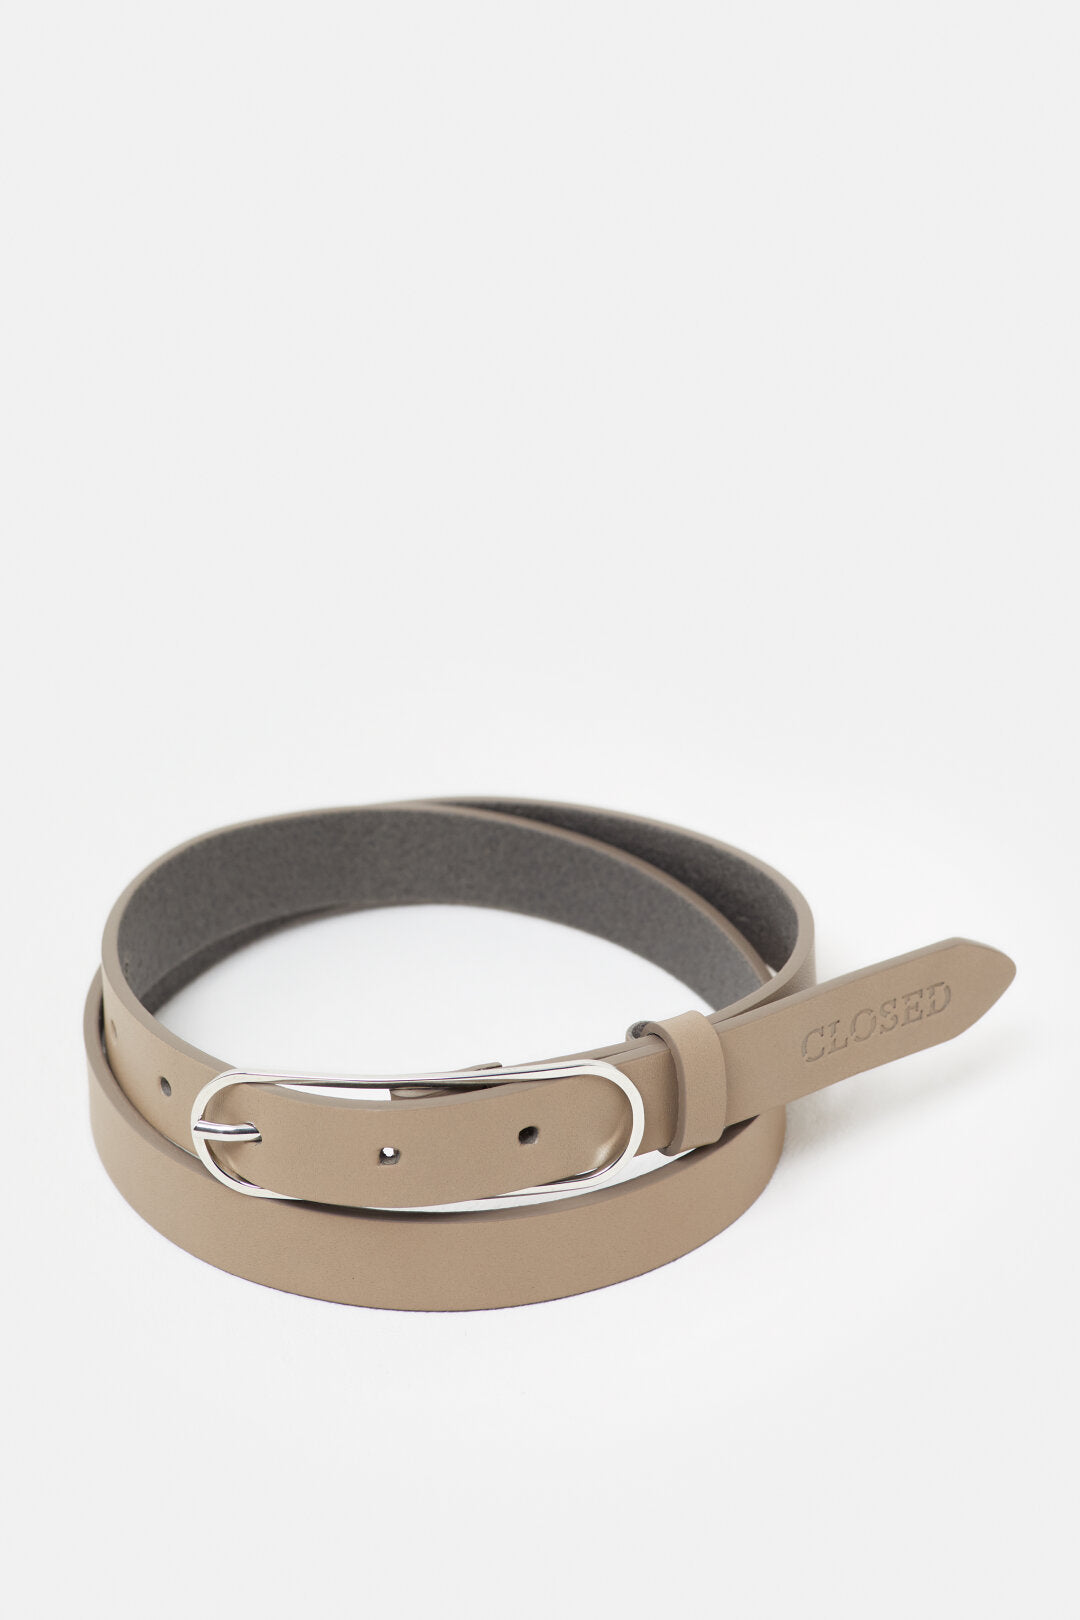 CLOSED WOMENS SLIM BELT WITH METAL BUCKLE- 2 COLORS